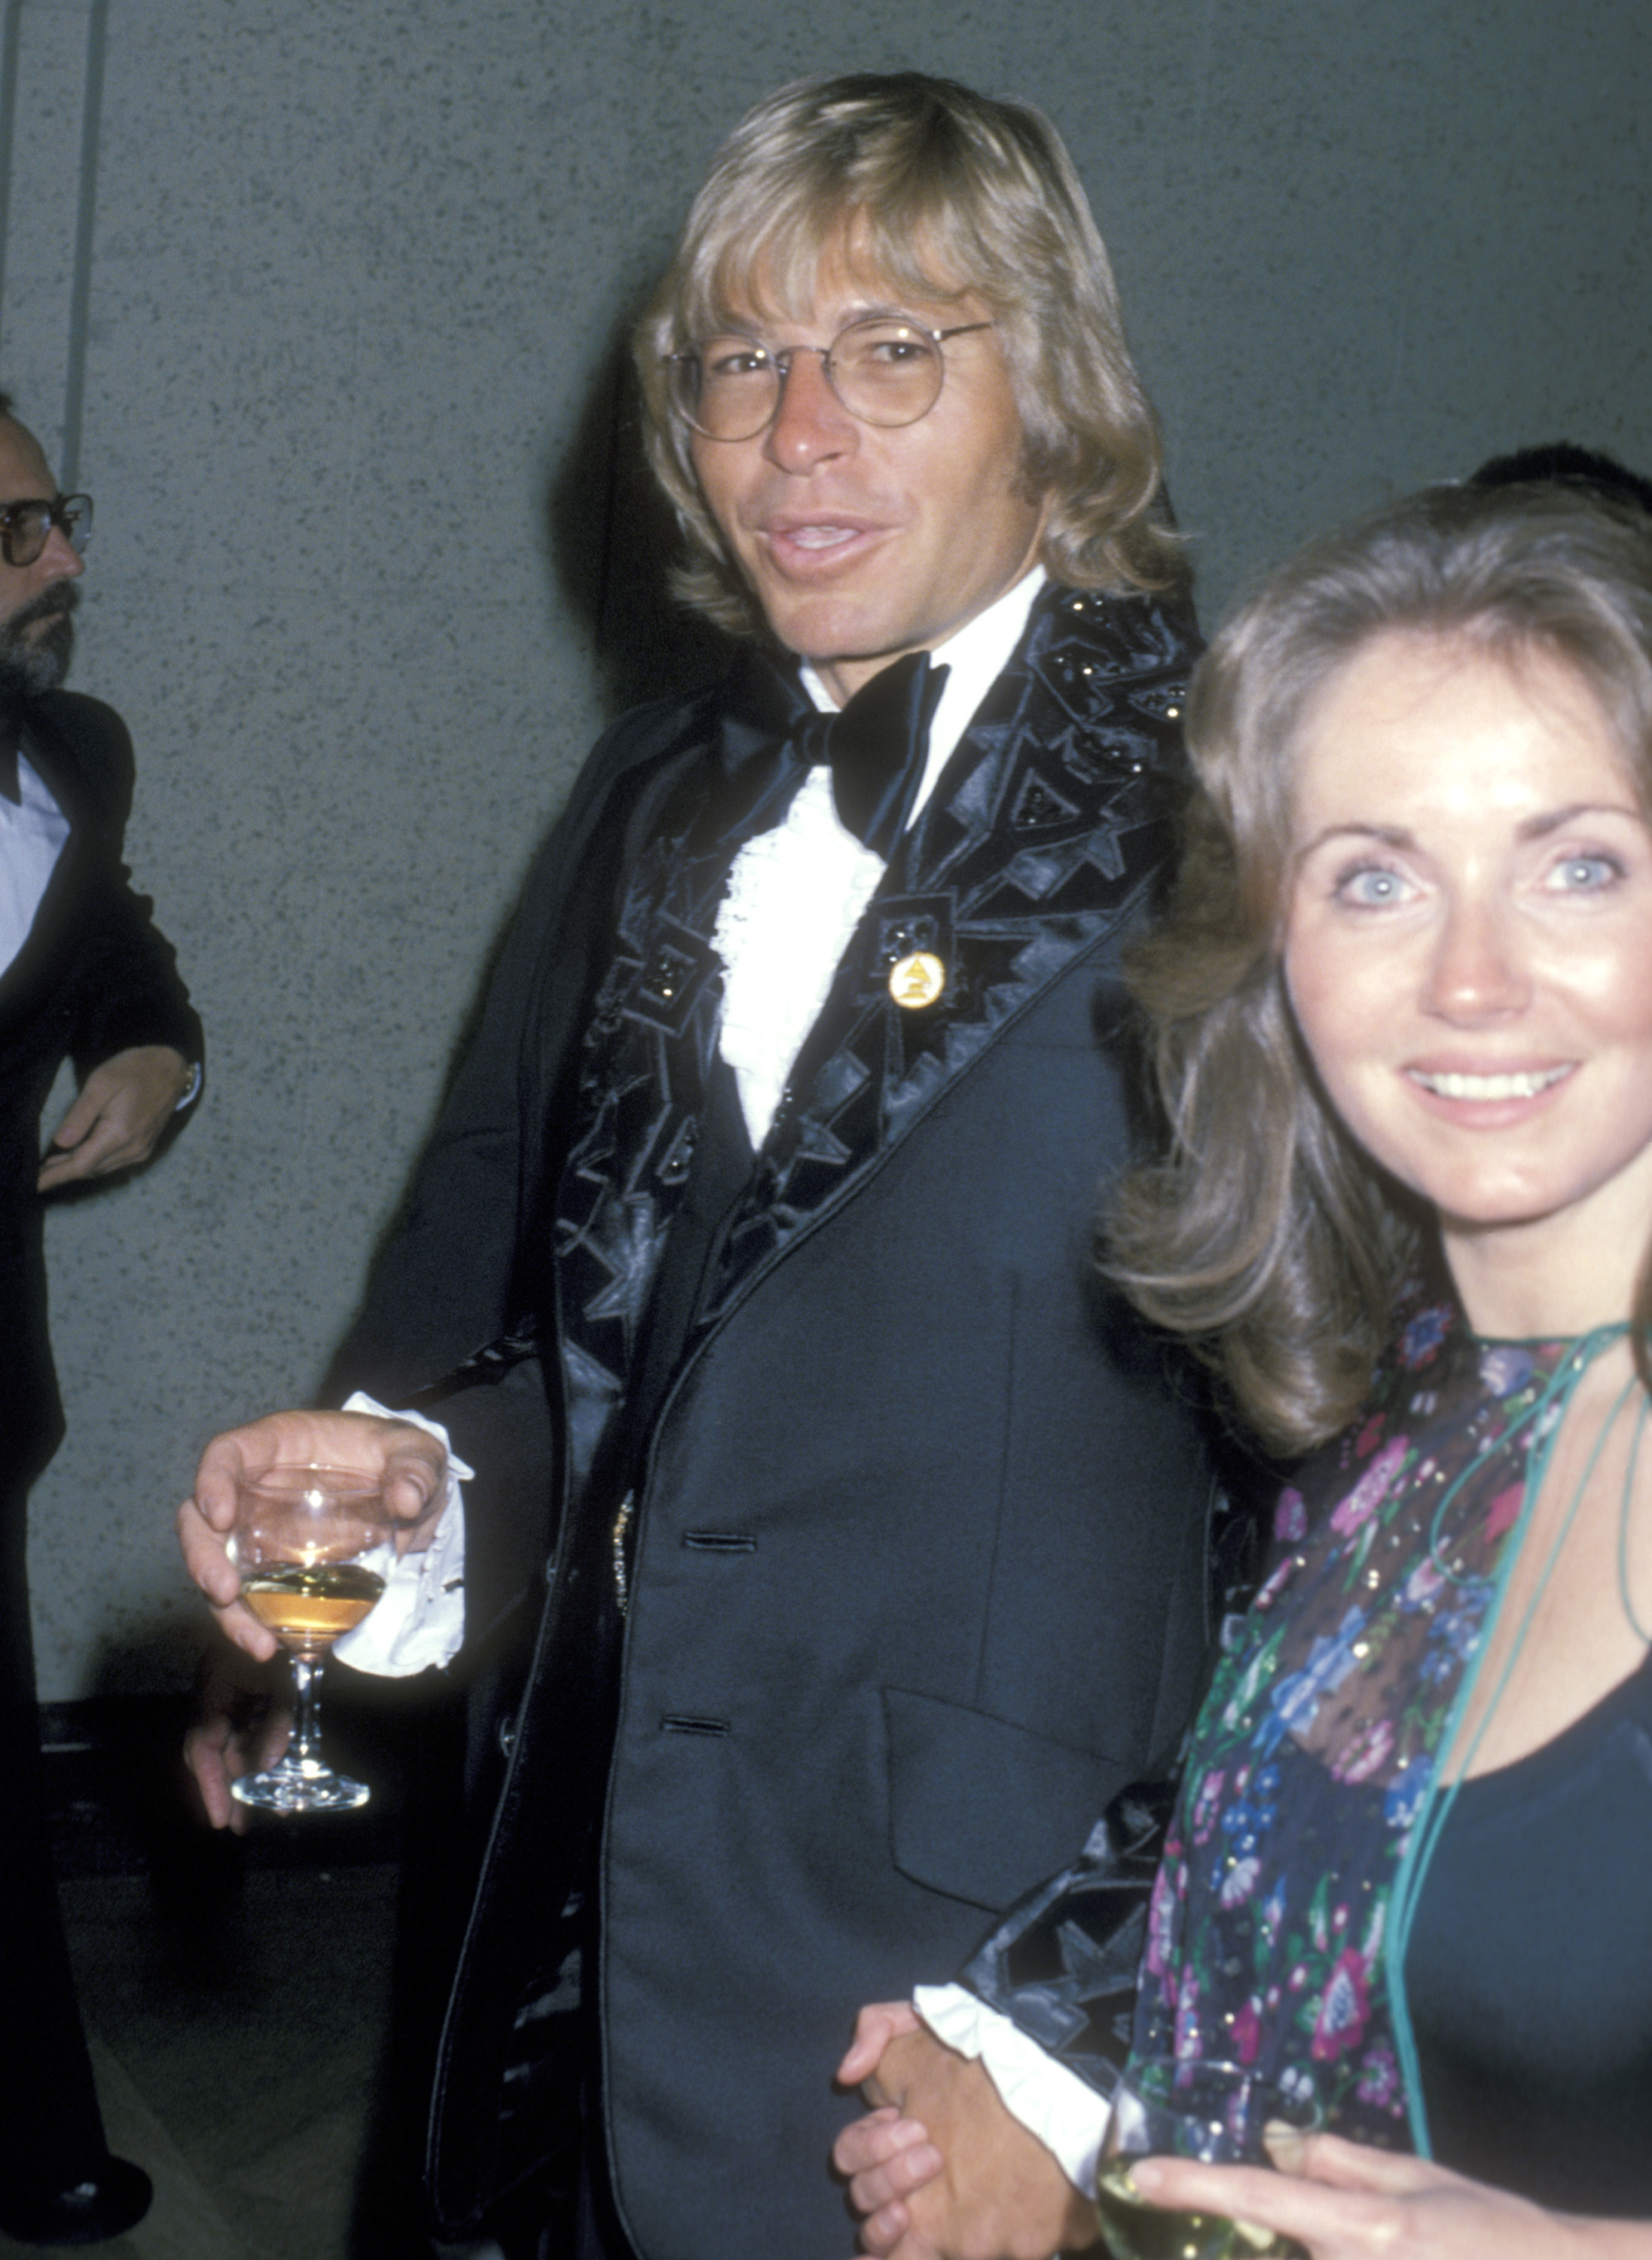 Musician John Denver and Annie Martell attend the 20th Annual Grammy Awards on February 23, 1978, at Shrine Auditorium in Los Angeles, California. | Source: Getty Images